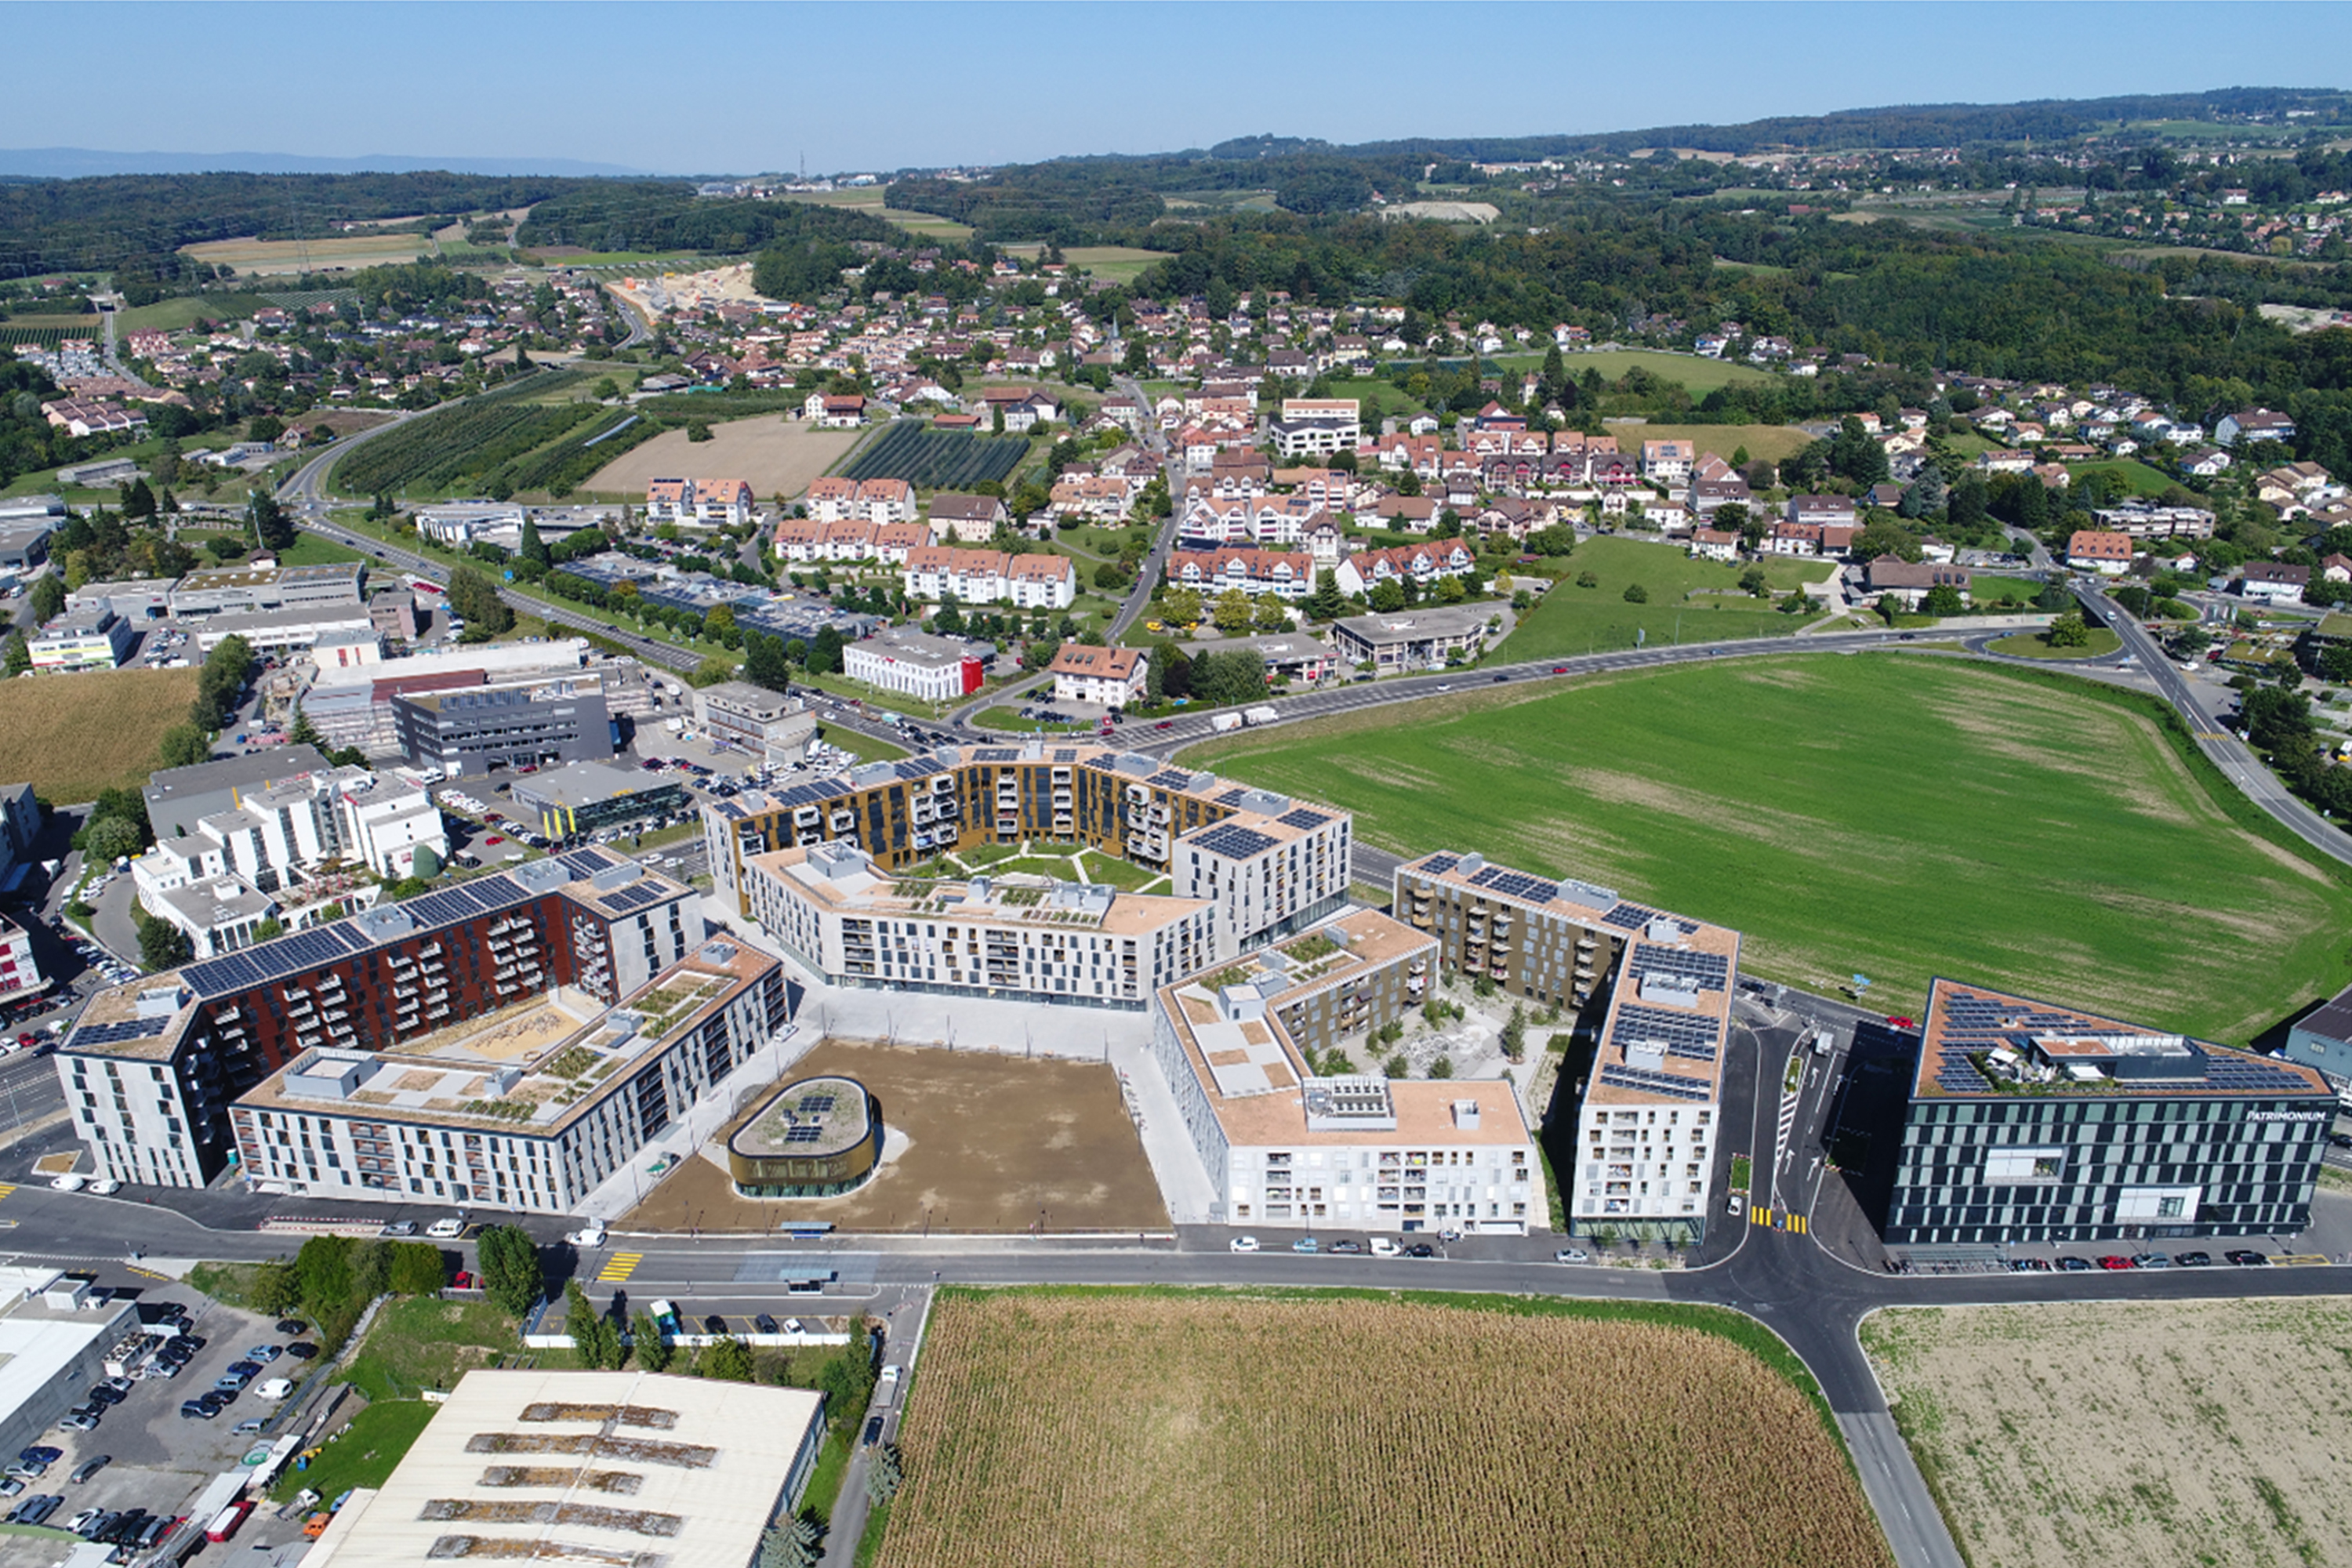 Oassis, the new sustainable quarter in Crissier is now ready to live in